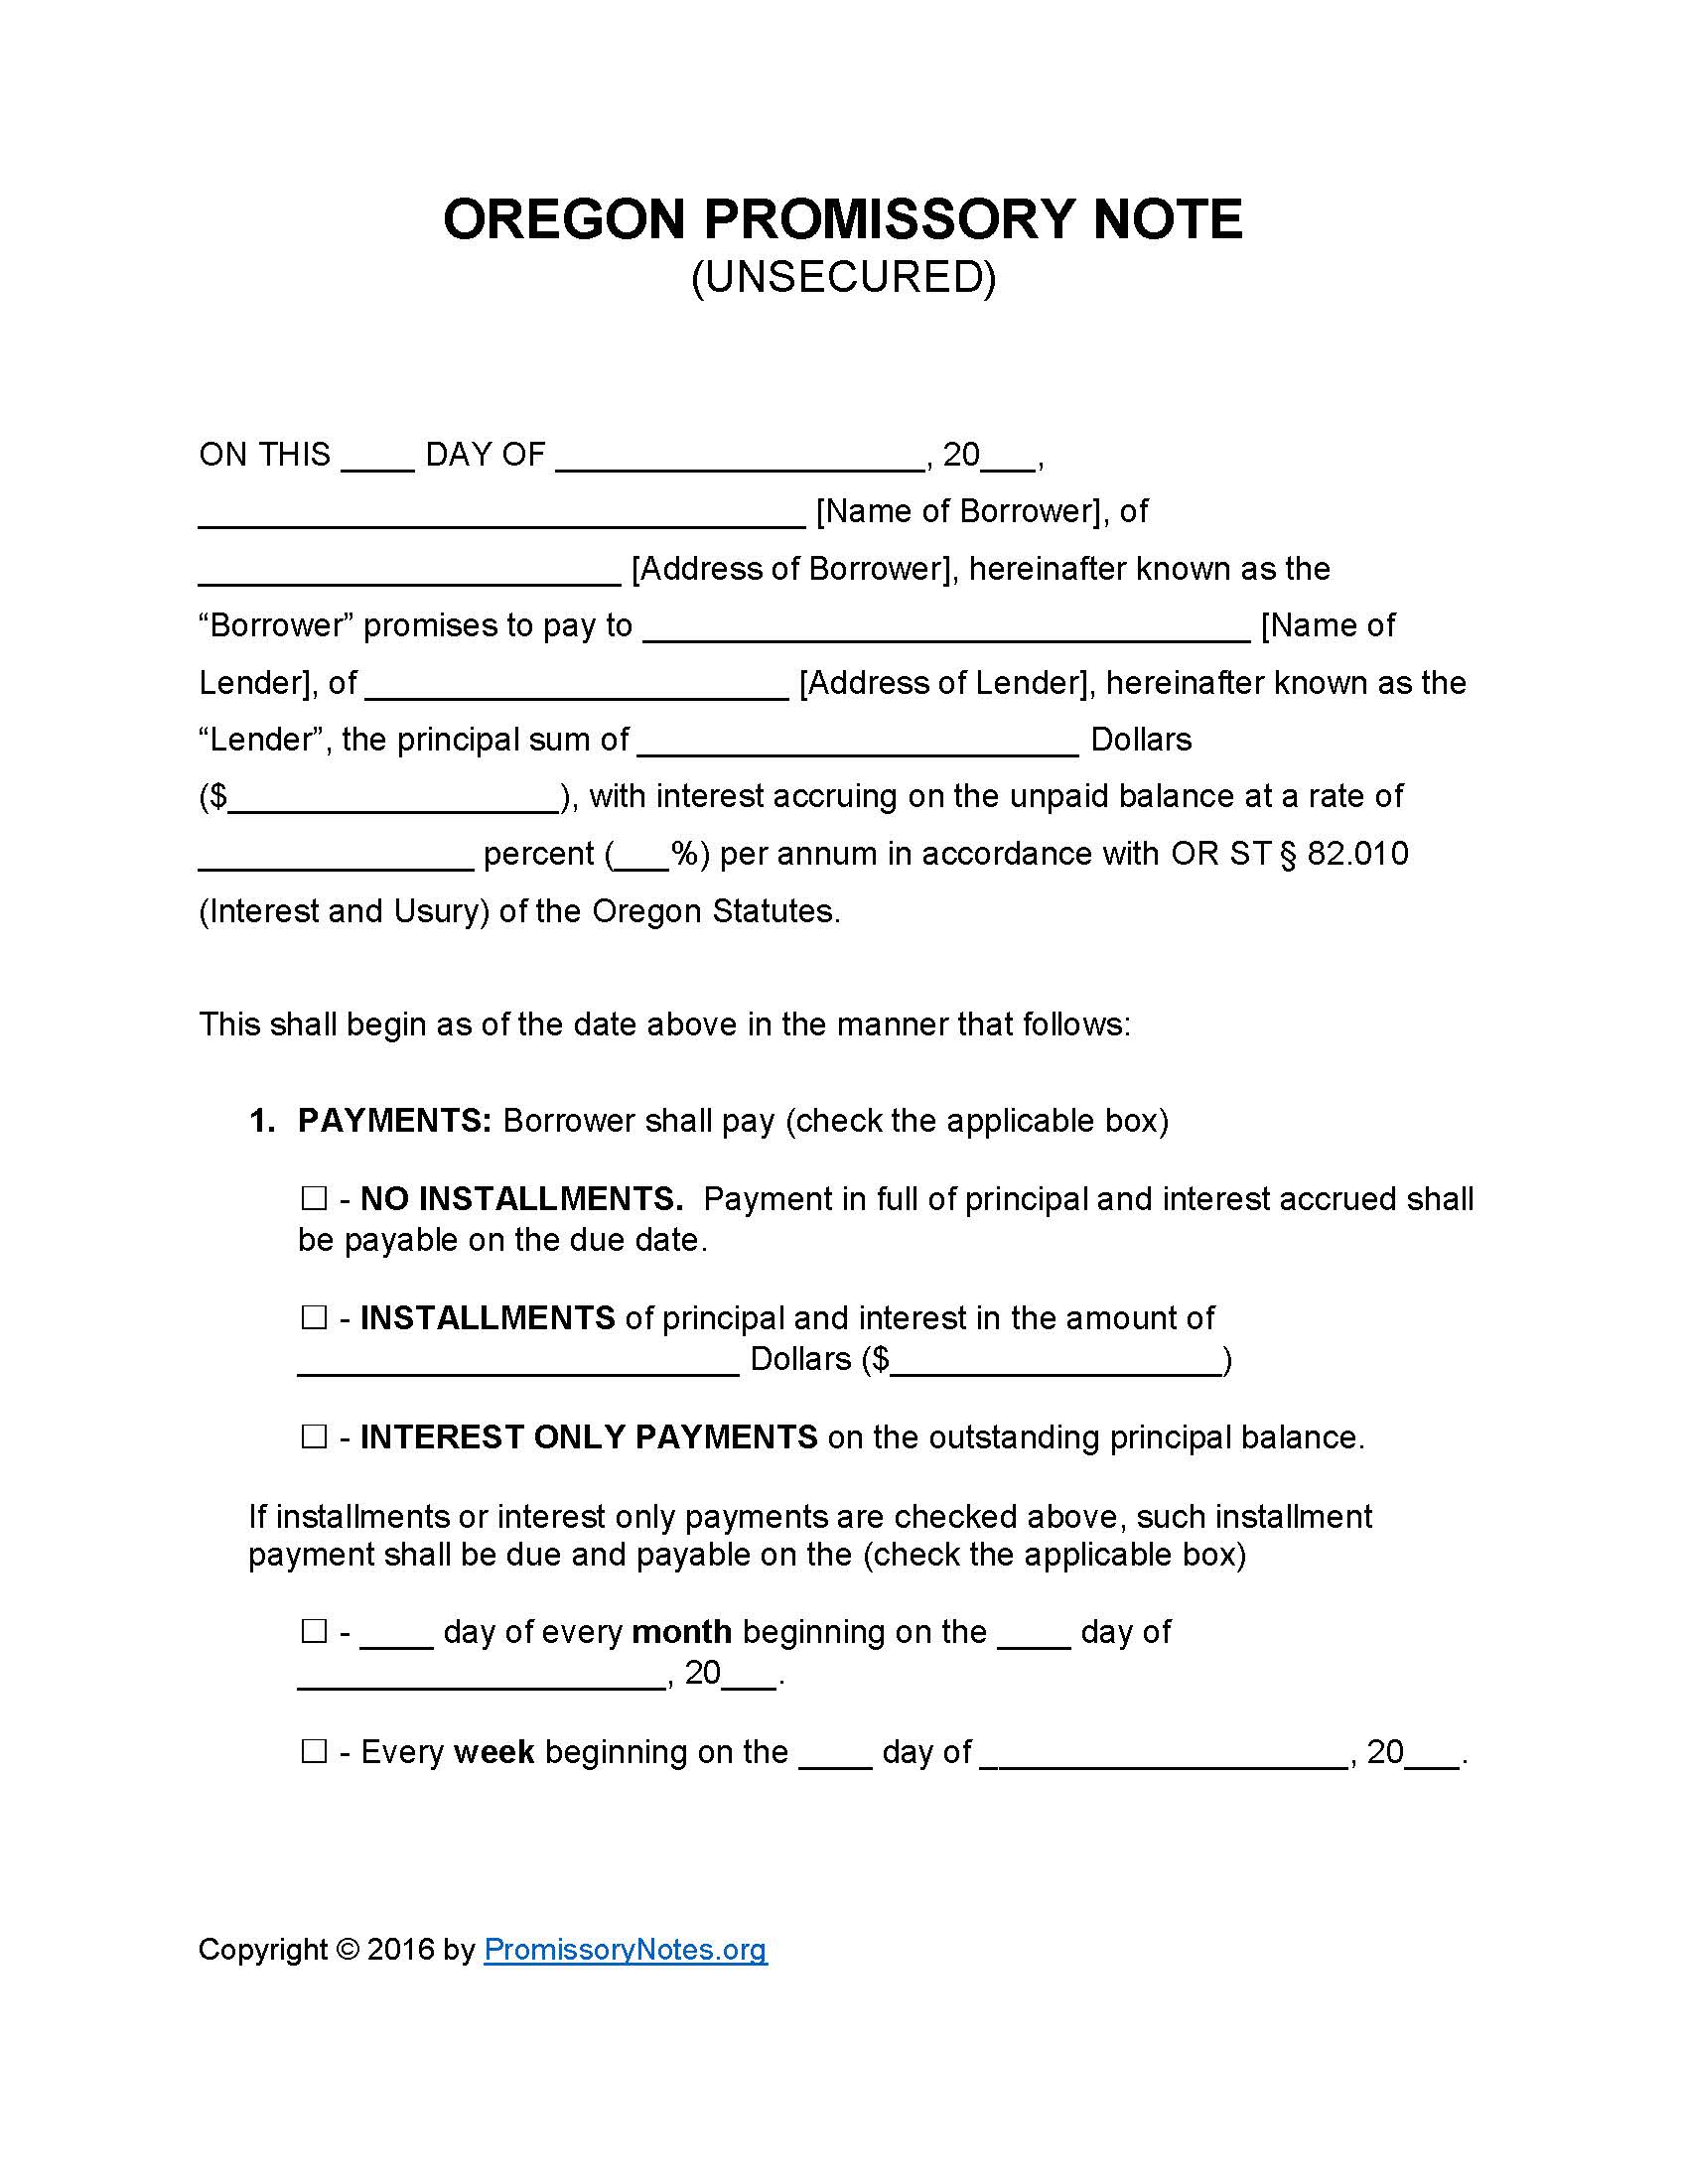 oregon-unsecured-promissory-note-form